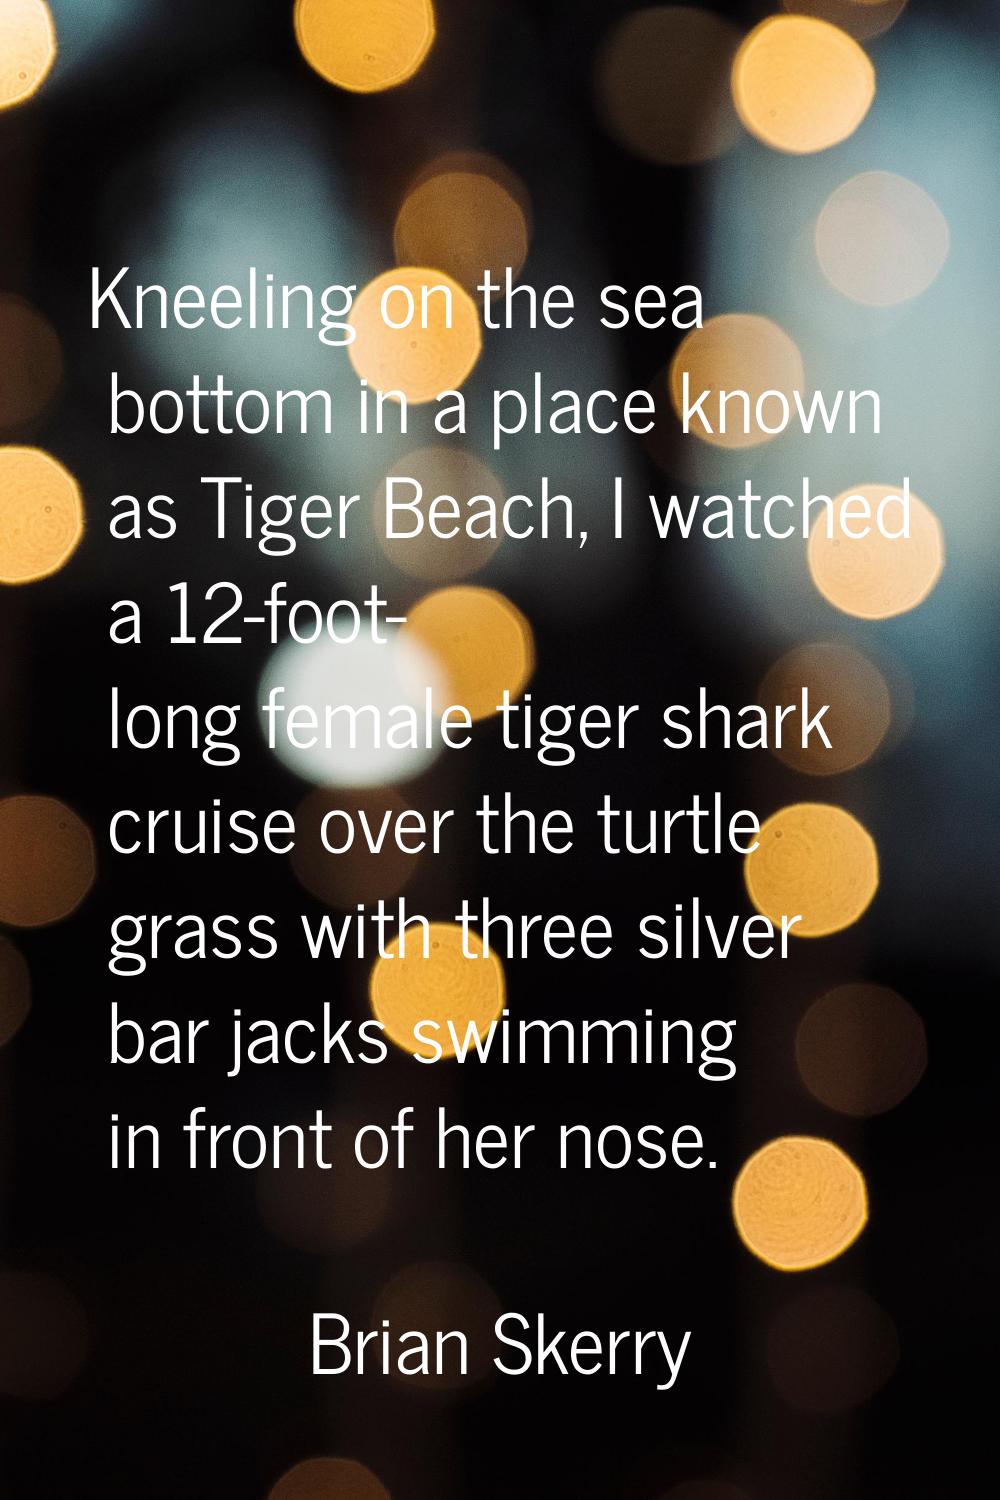 Kneeling on the sea bottom in a place known as Tiger Beach, I watched a 12-foot- long female tiger 